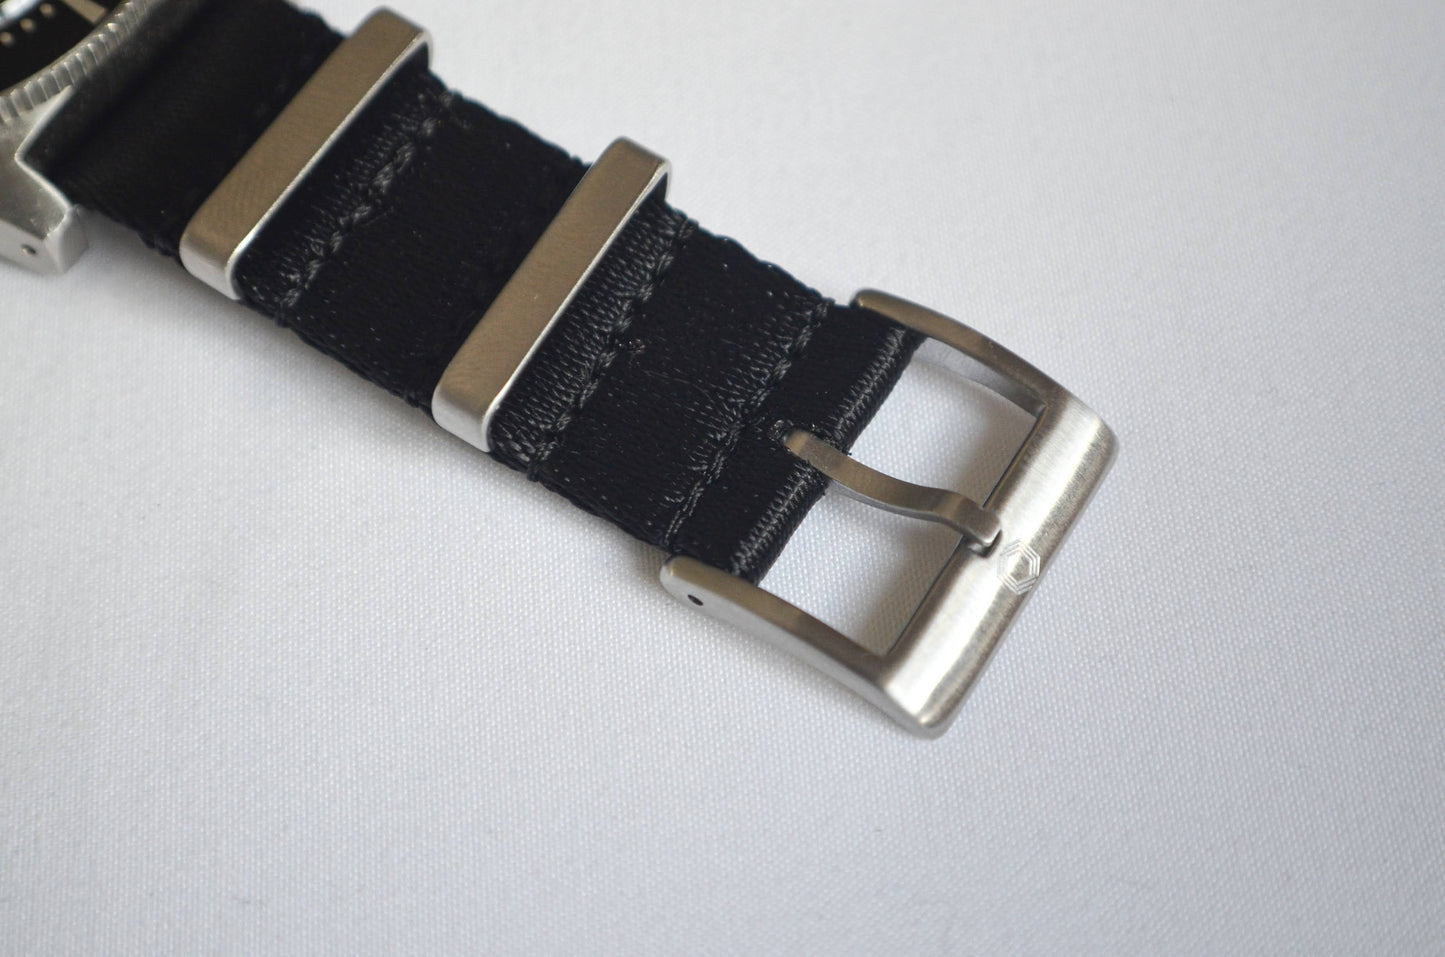 The 'Azumi' - Black adjustable military watch strap made of a soft seat belt nylon